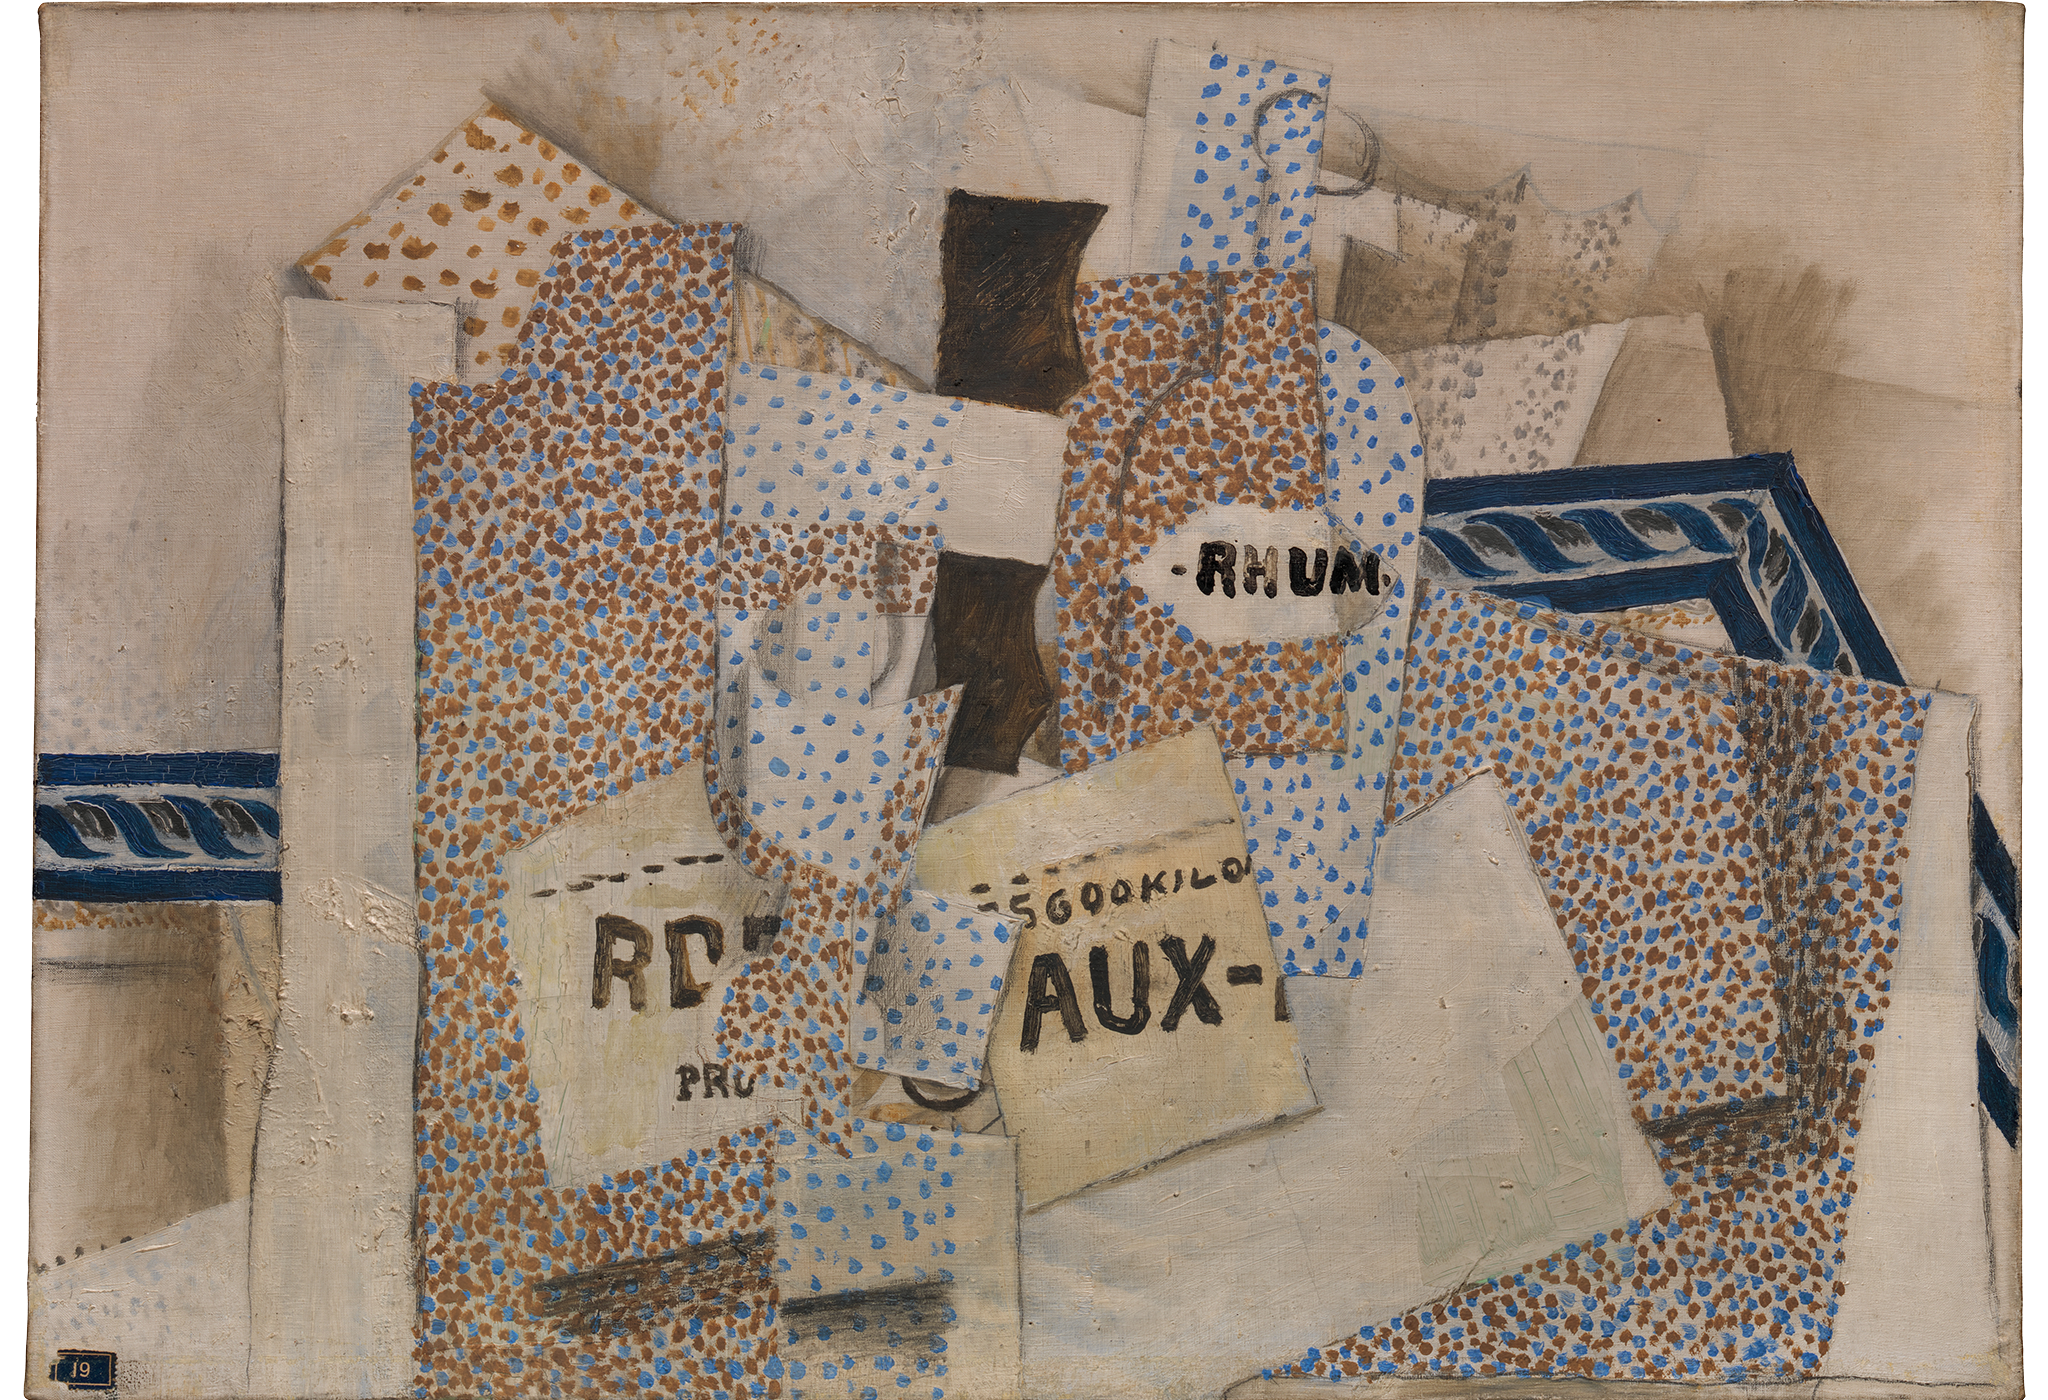 Oil painting which imitates layered paper and rum labels with red and blue dots throughout